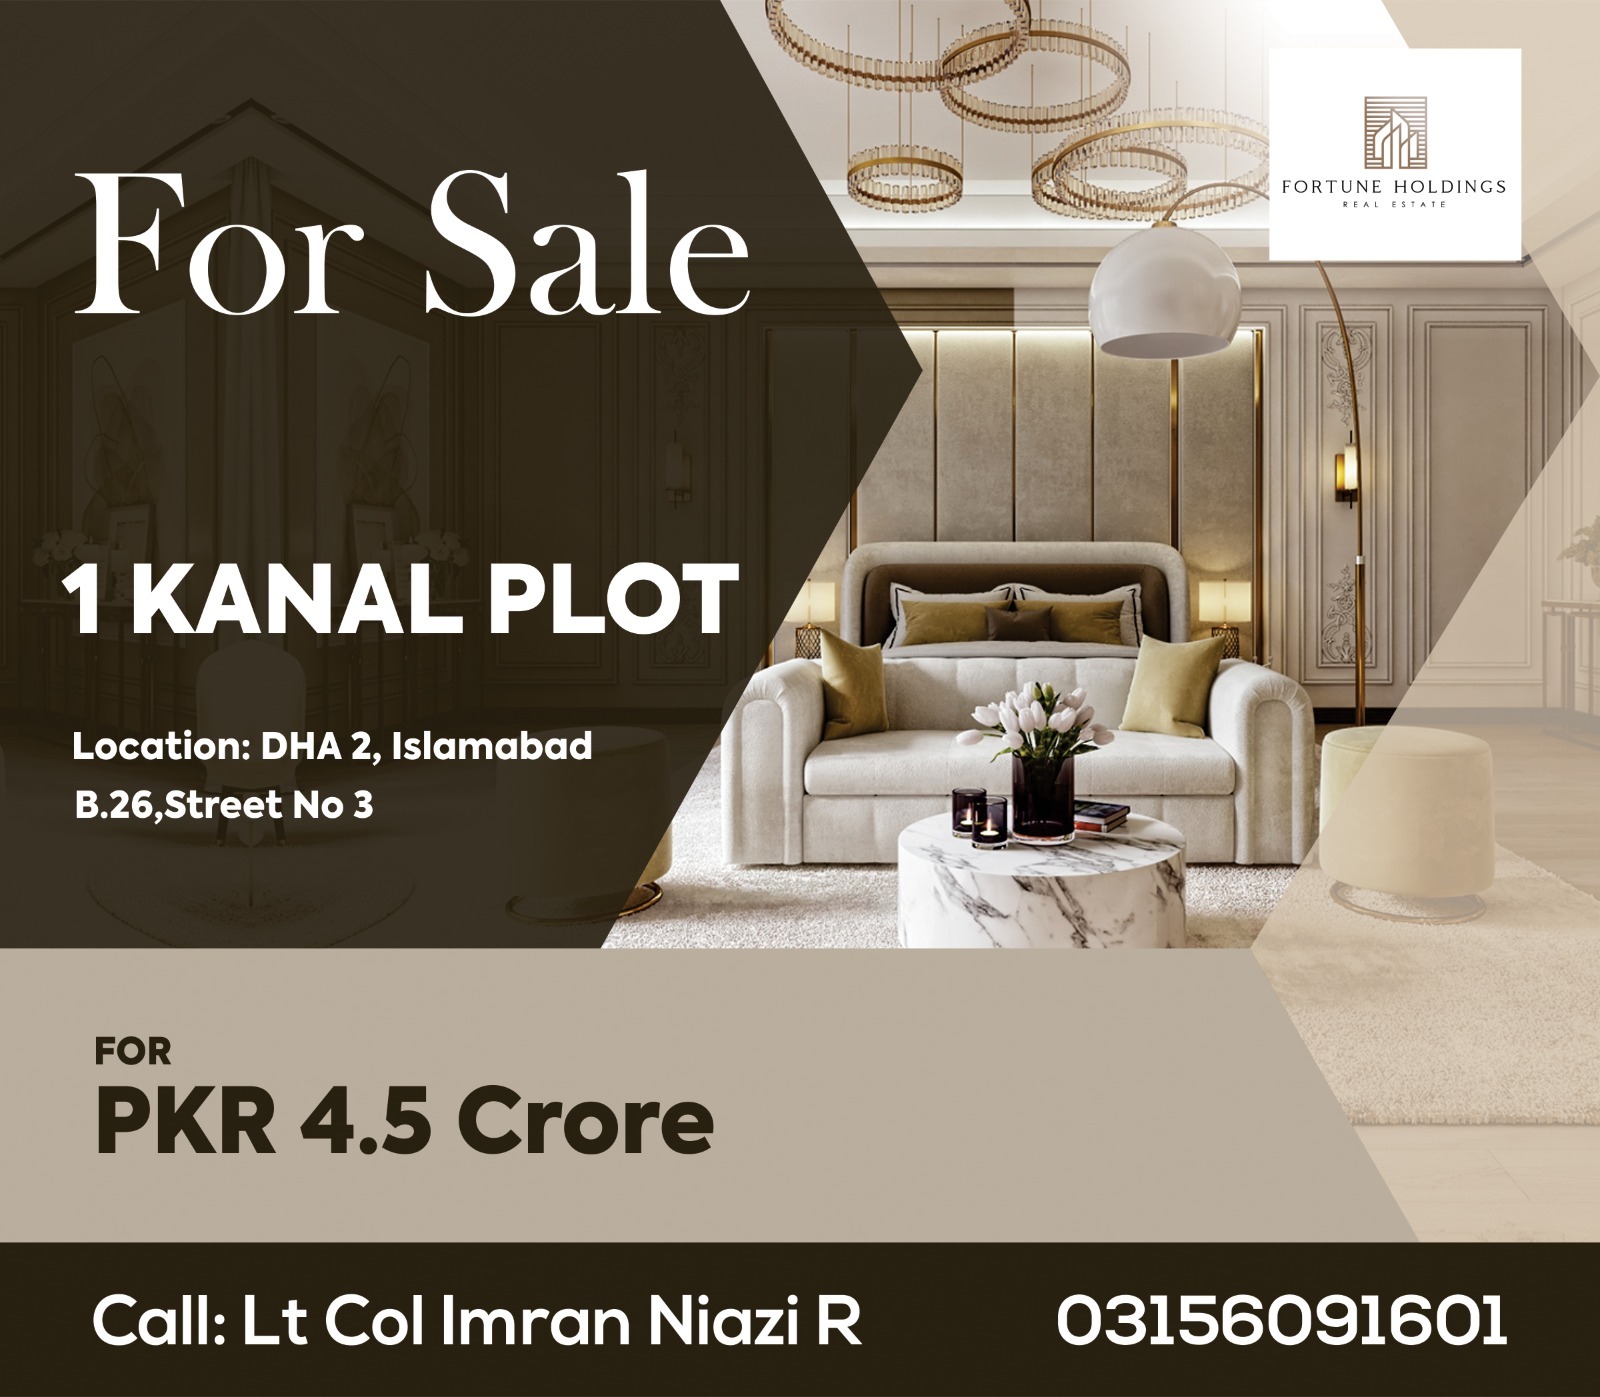 1 Kanal Residential Plot For Sale DHA 2 Islamabad